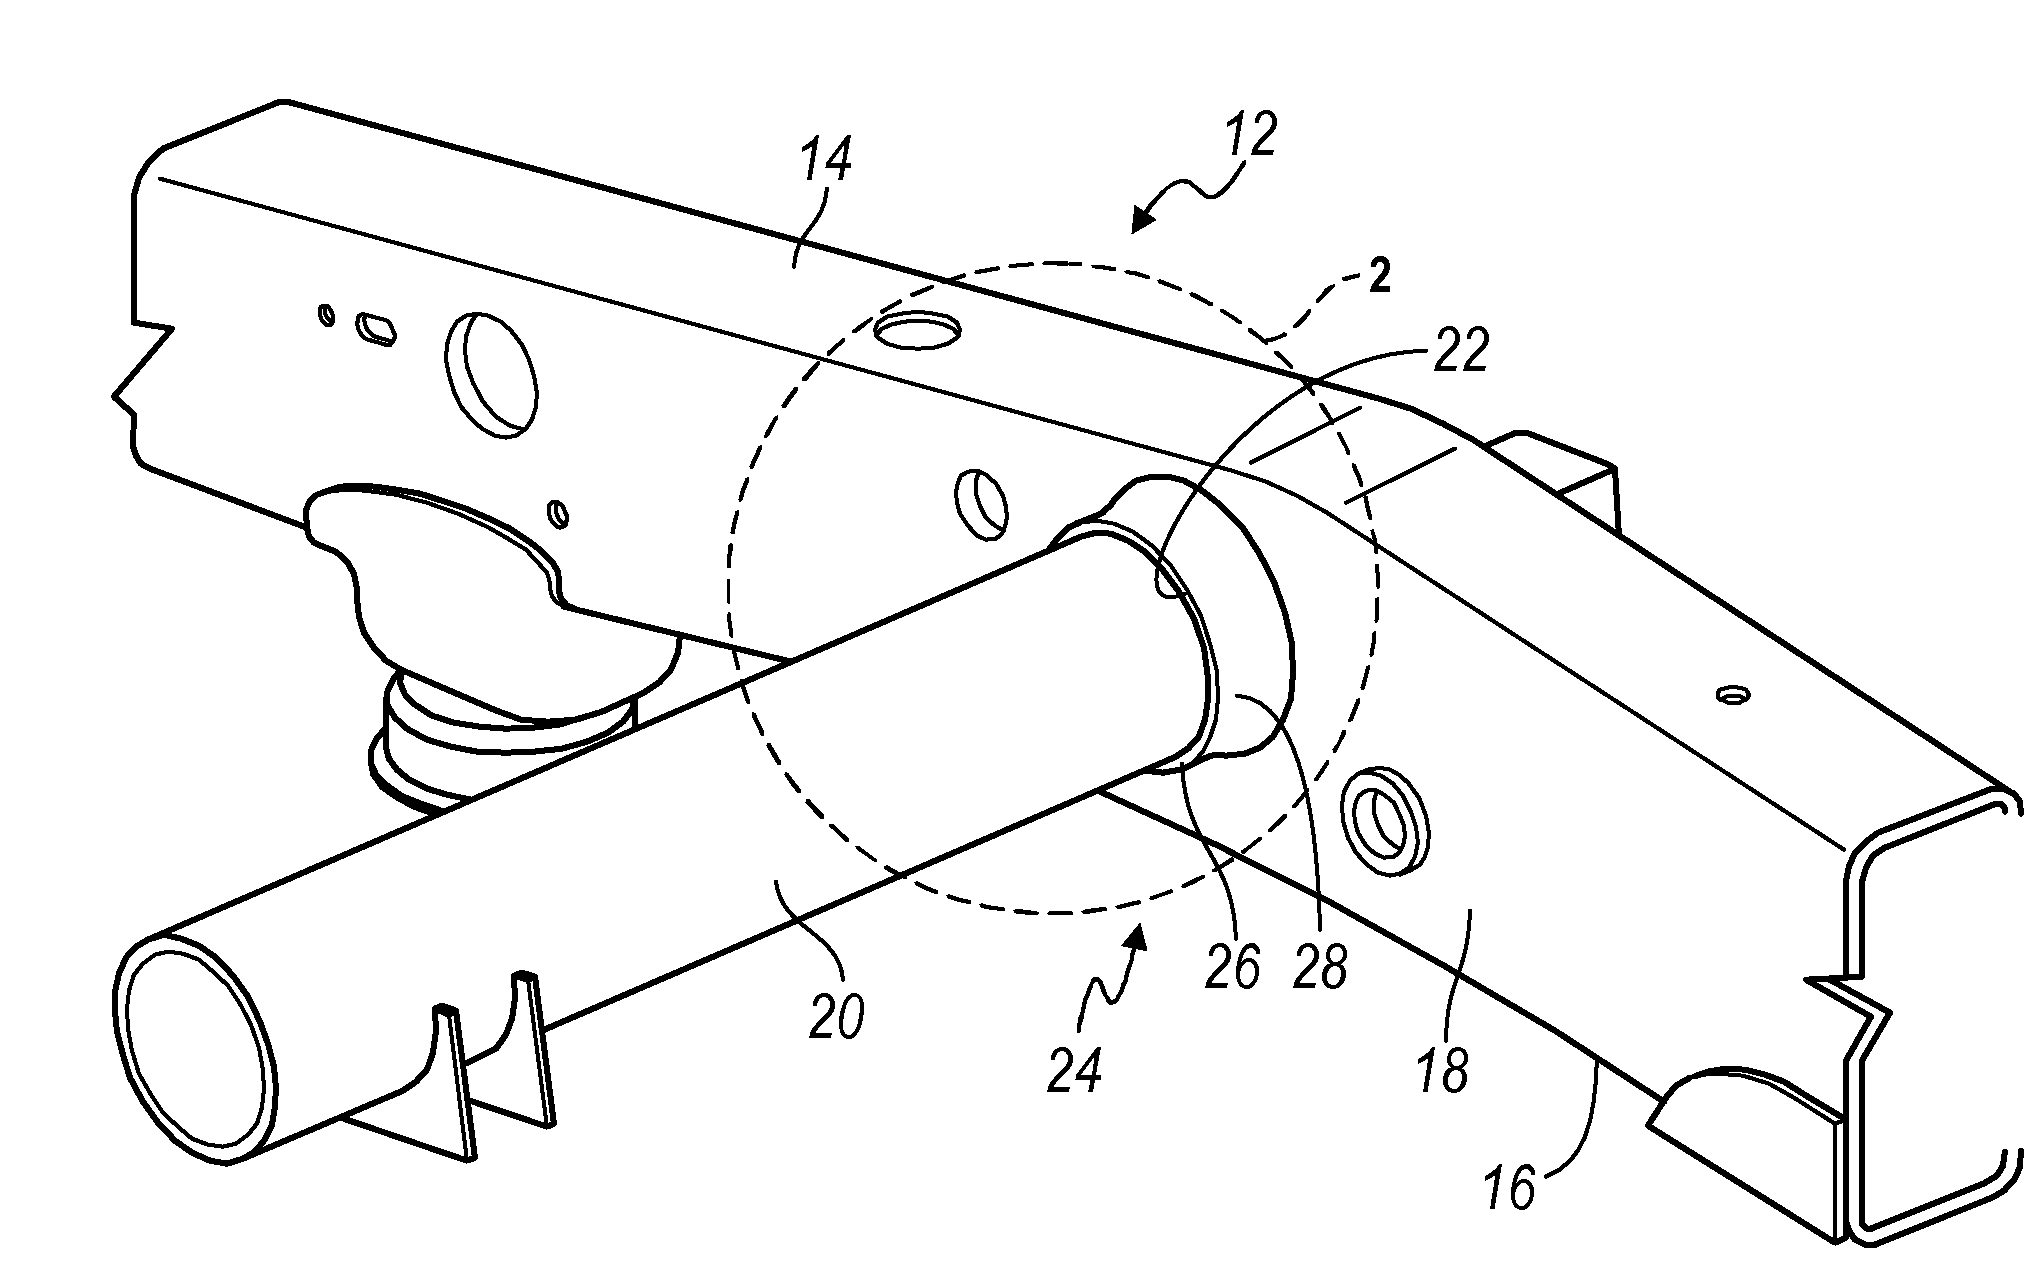 Welded Joint and Method for Forming the Joint